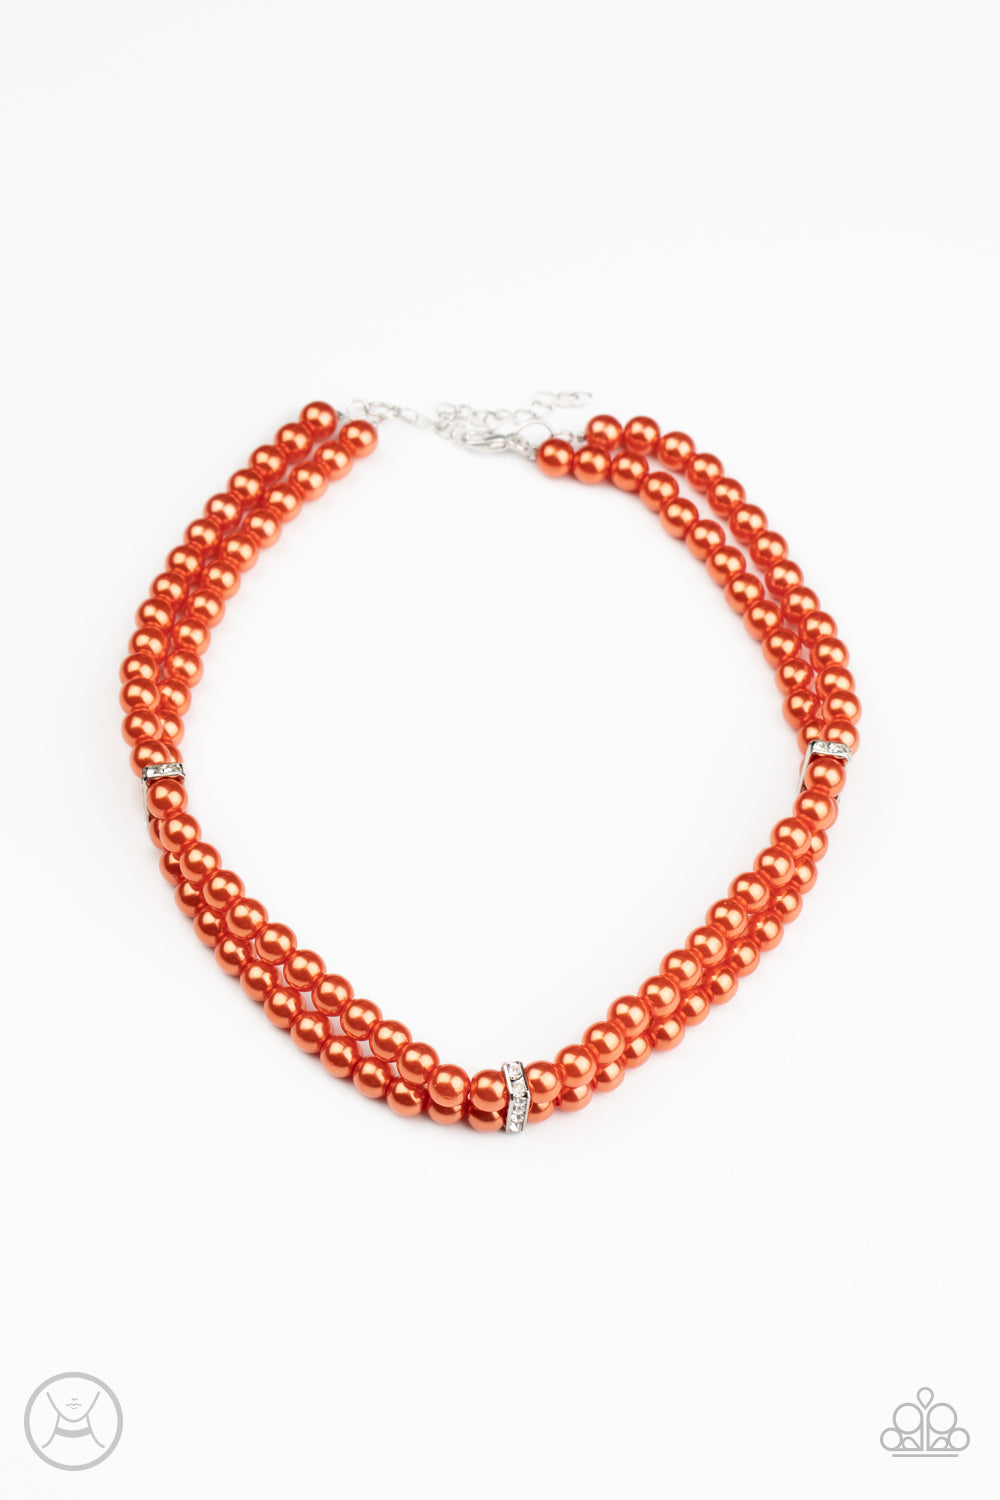 Pinched between white rhinestone encrusted frames, strands of classic orange pearls layer around the neck for a timeless look. Features an adjustable clasp closure.